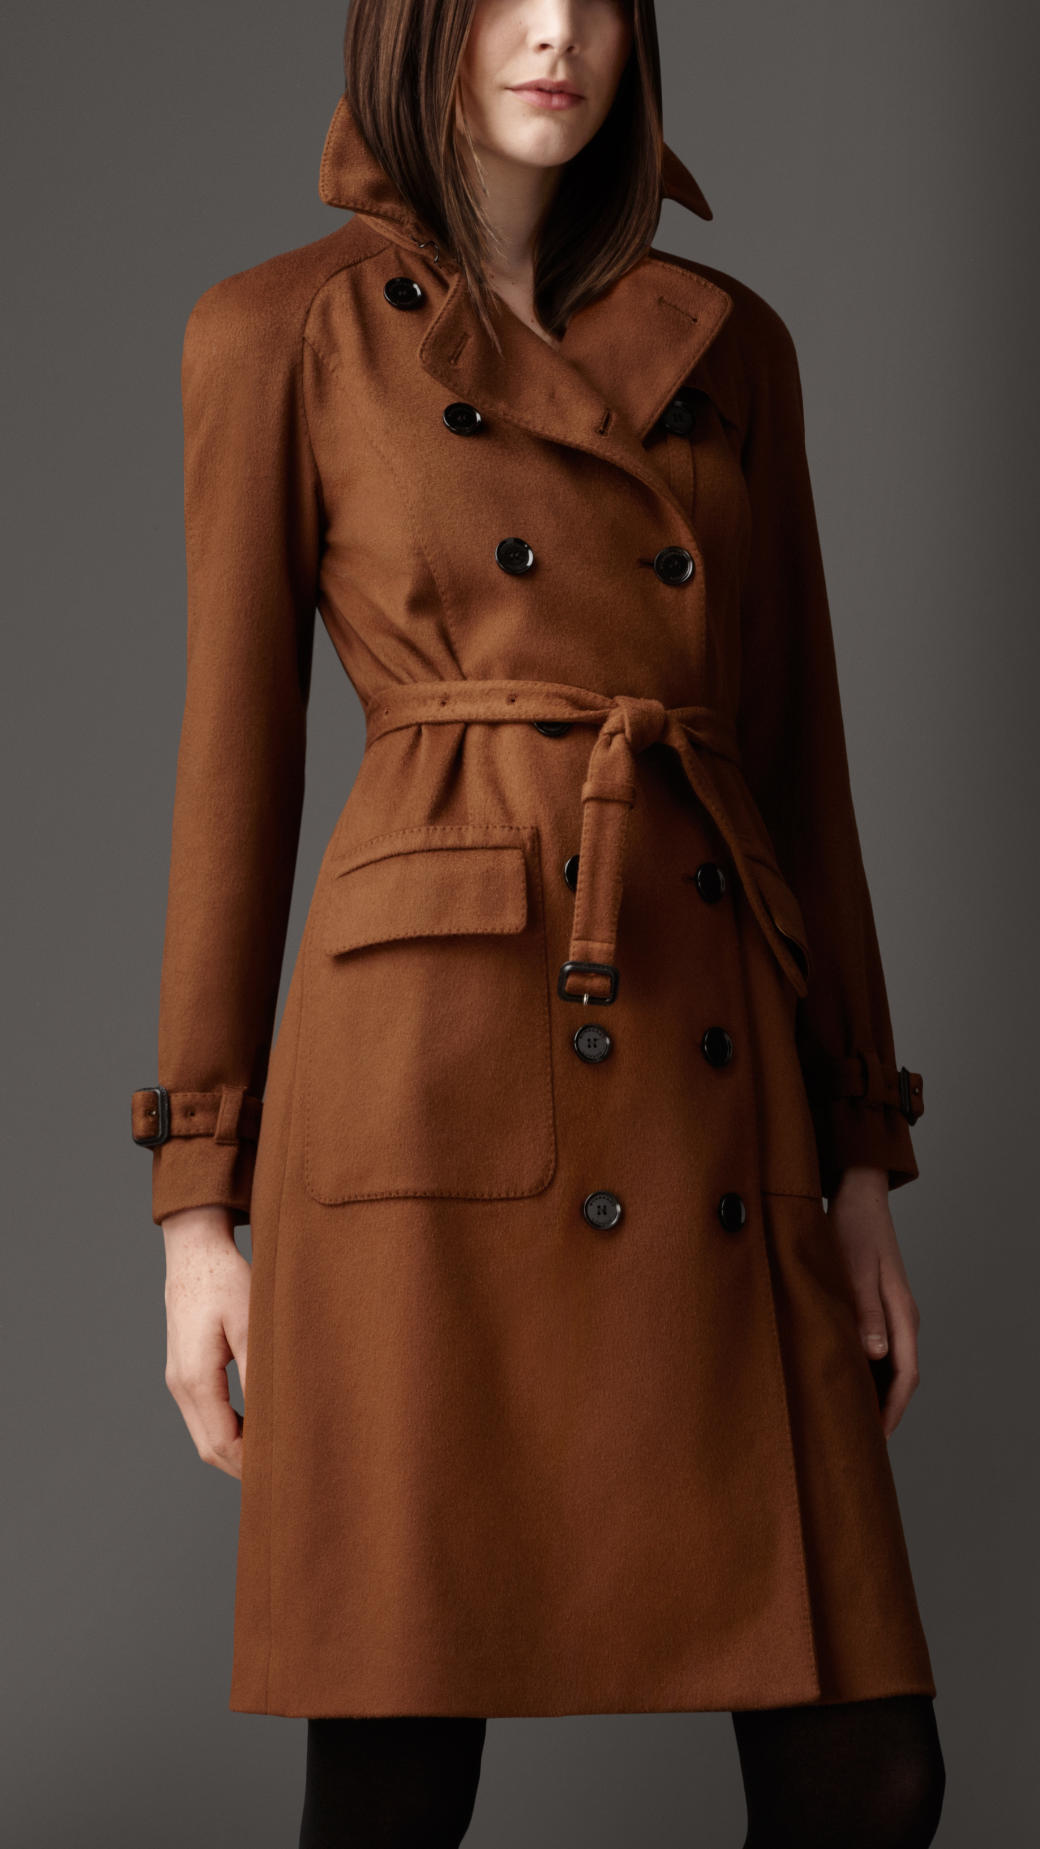 Lyst - Burberry Long Cashmere Trench Coat in Brown